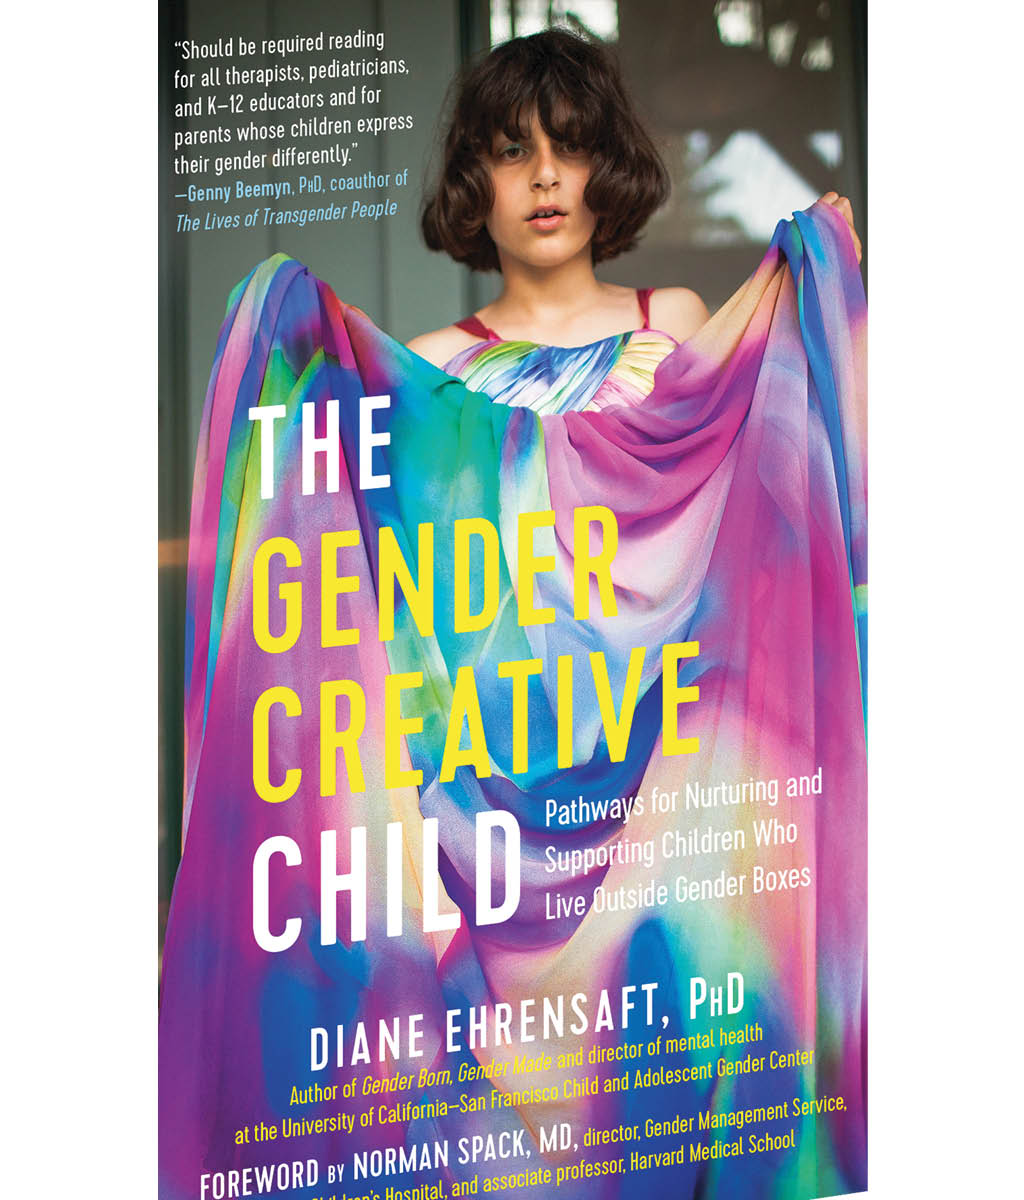 The Gender Creative Child: Pathways for Nurturing and Supporting Children Who Live Outside Gender Boxes by Diane Ehrensaft , Norman Spack 